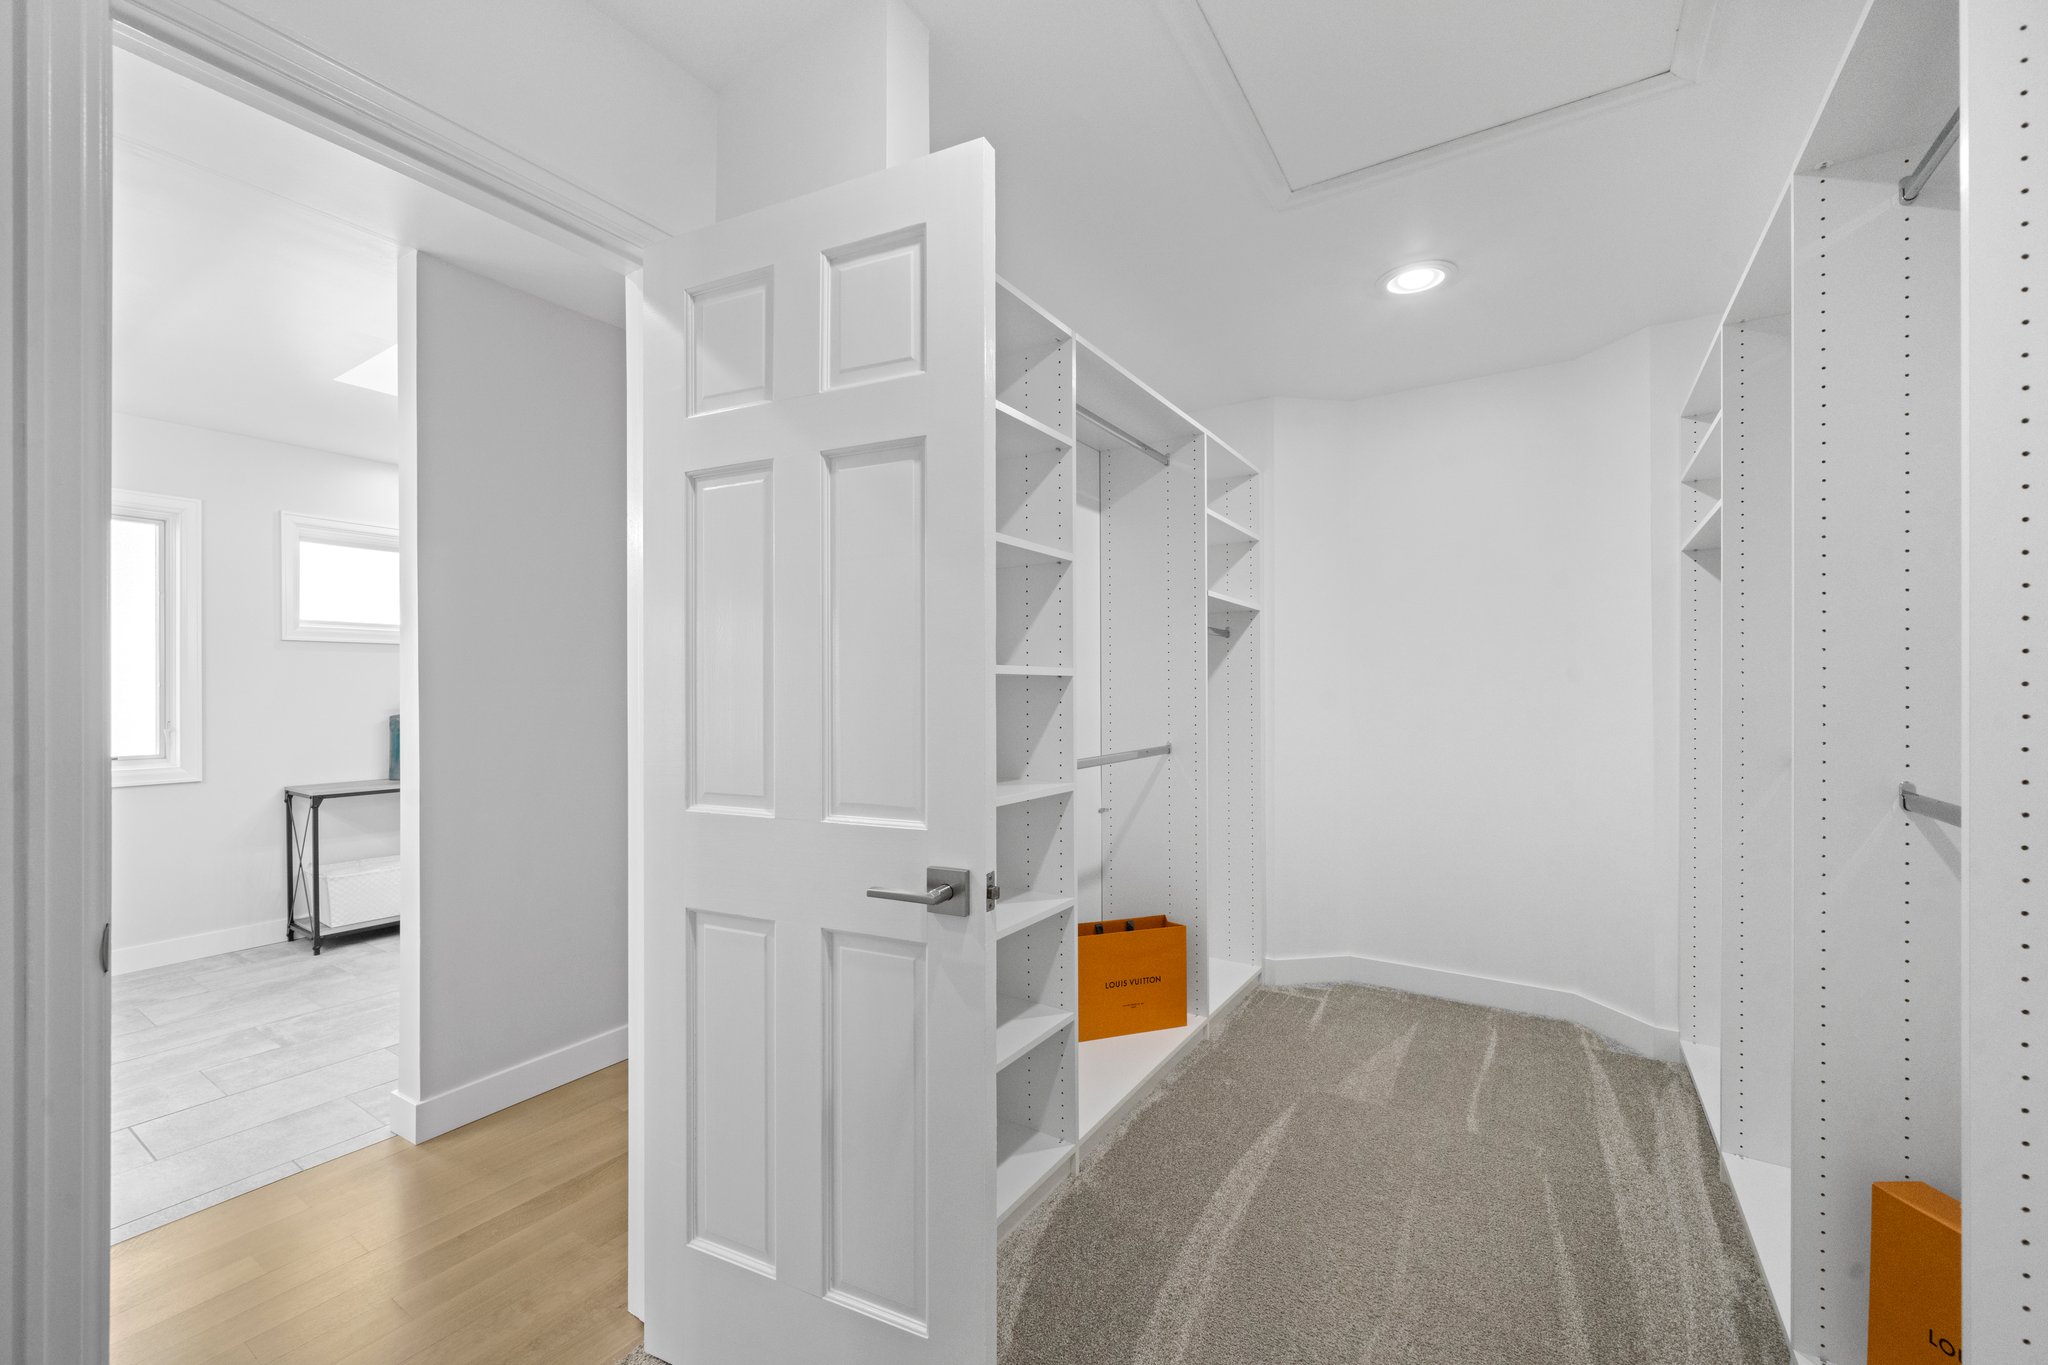 Primary closet with built-ins